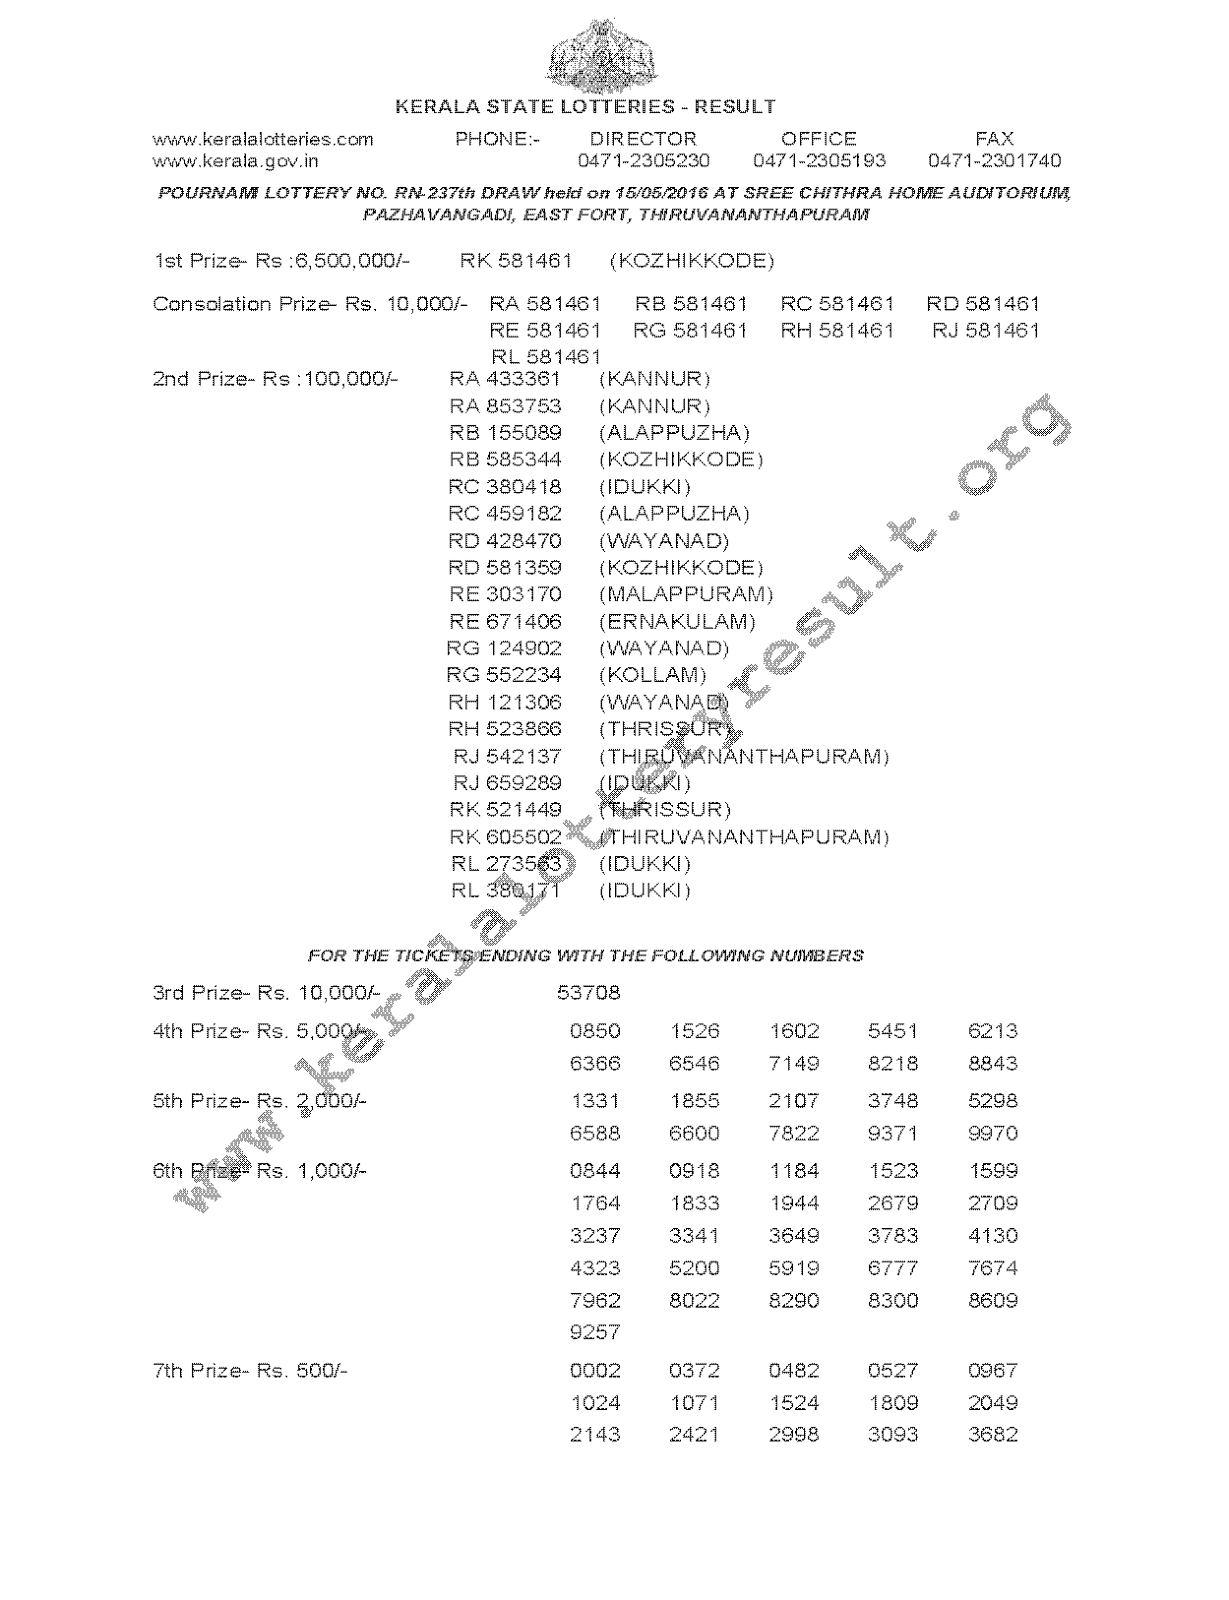 POURNAMI Lottery RN 237 Result 15-5-2016